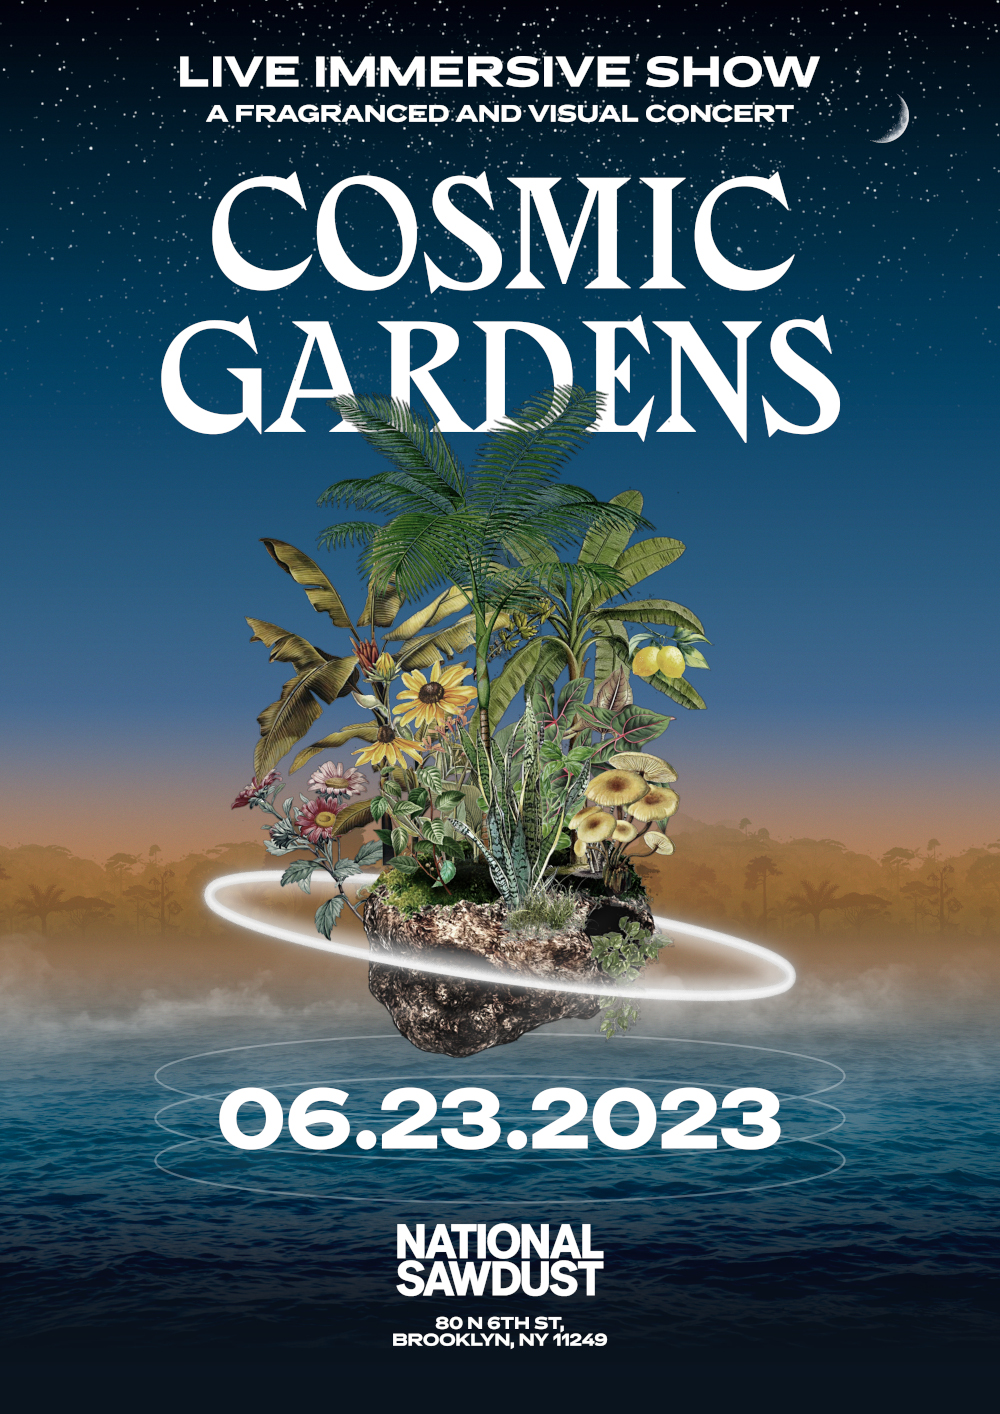 Cosmic Gardens’ immersive concert at National Sawdust in Brooklyn